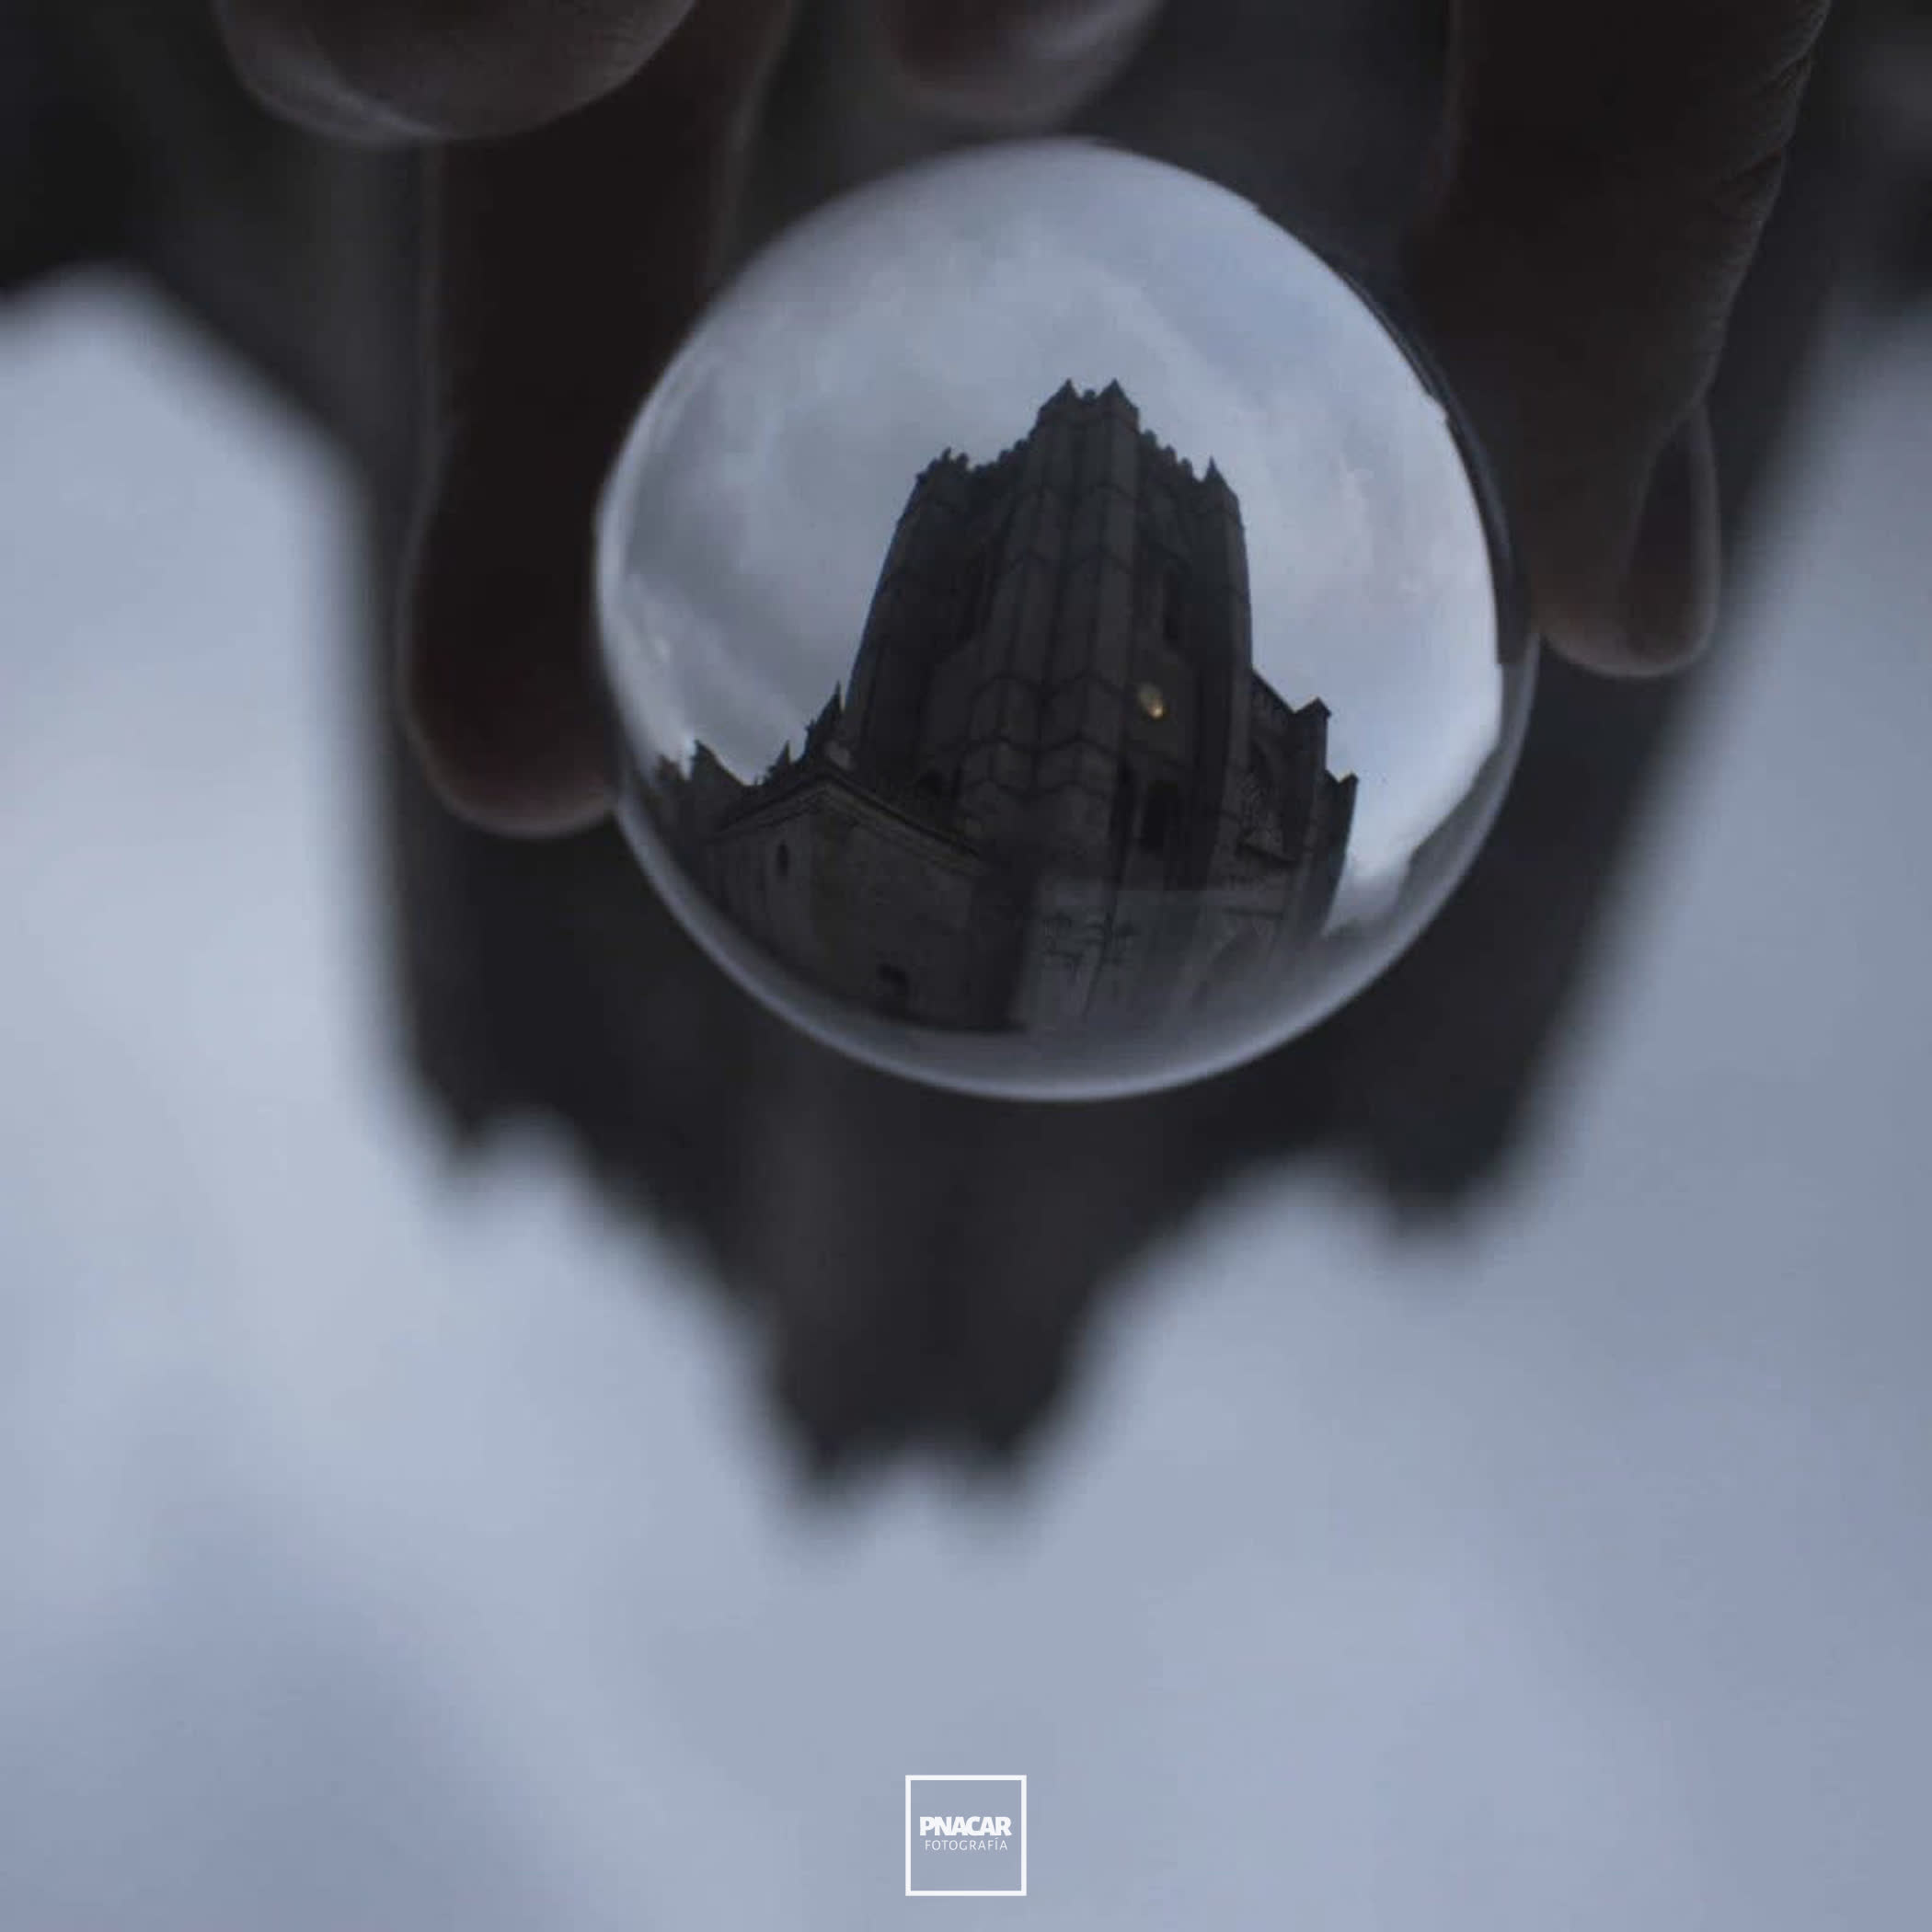 Tower of the Cathedral of Avila through a glass ball 